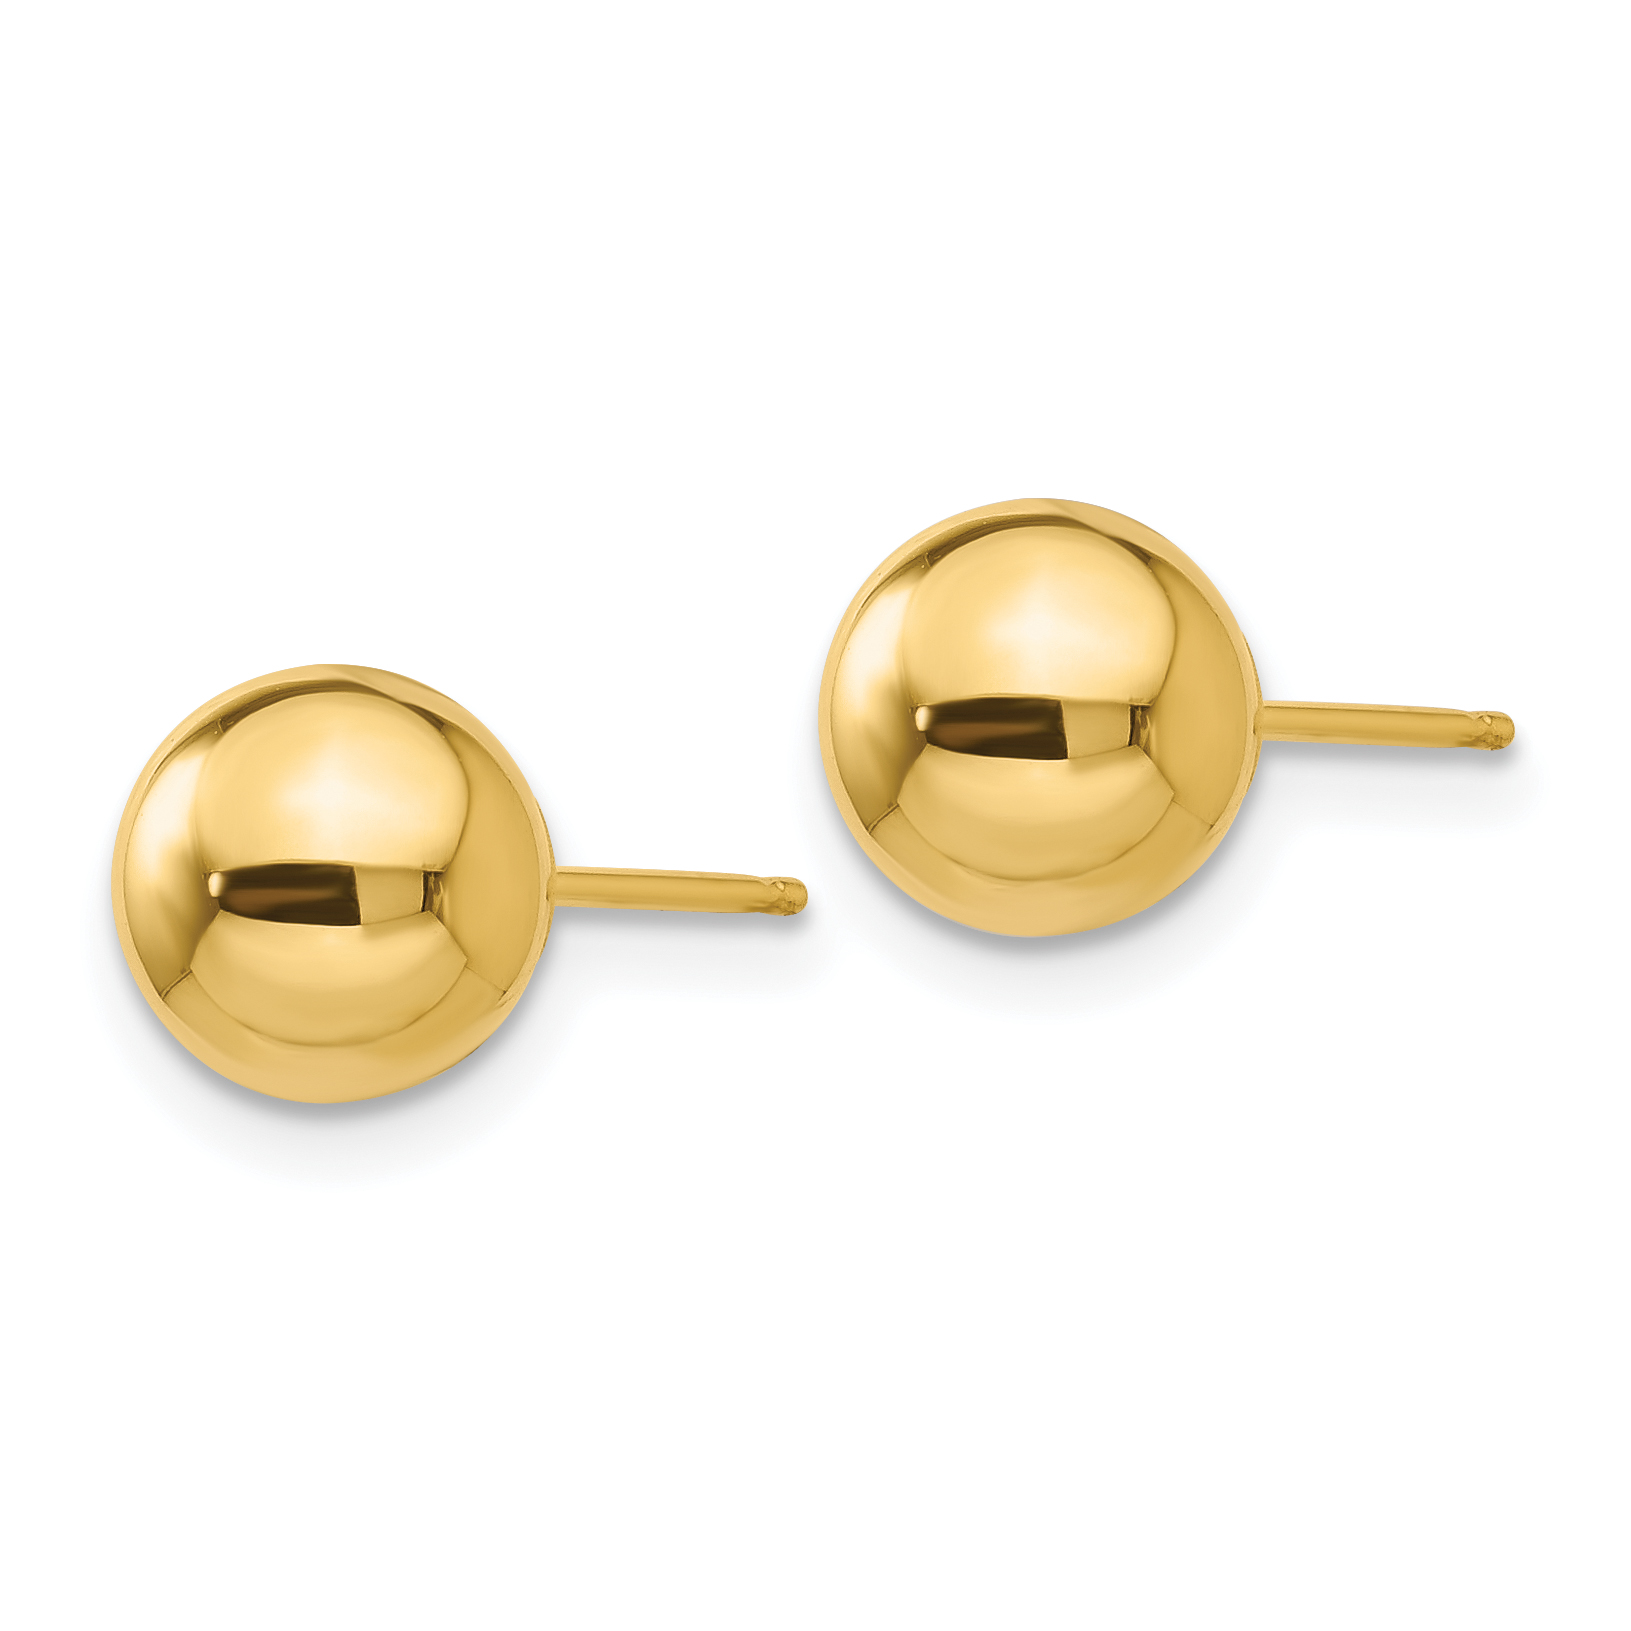 Quality Gold 14k Polished 7mm Ball Post Earrings